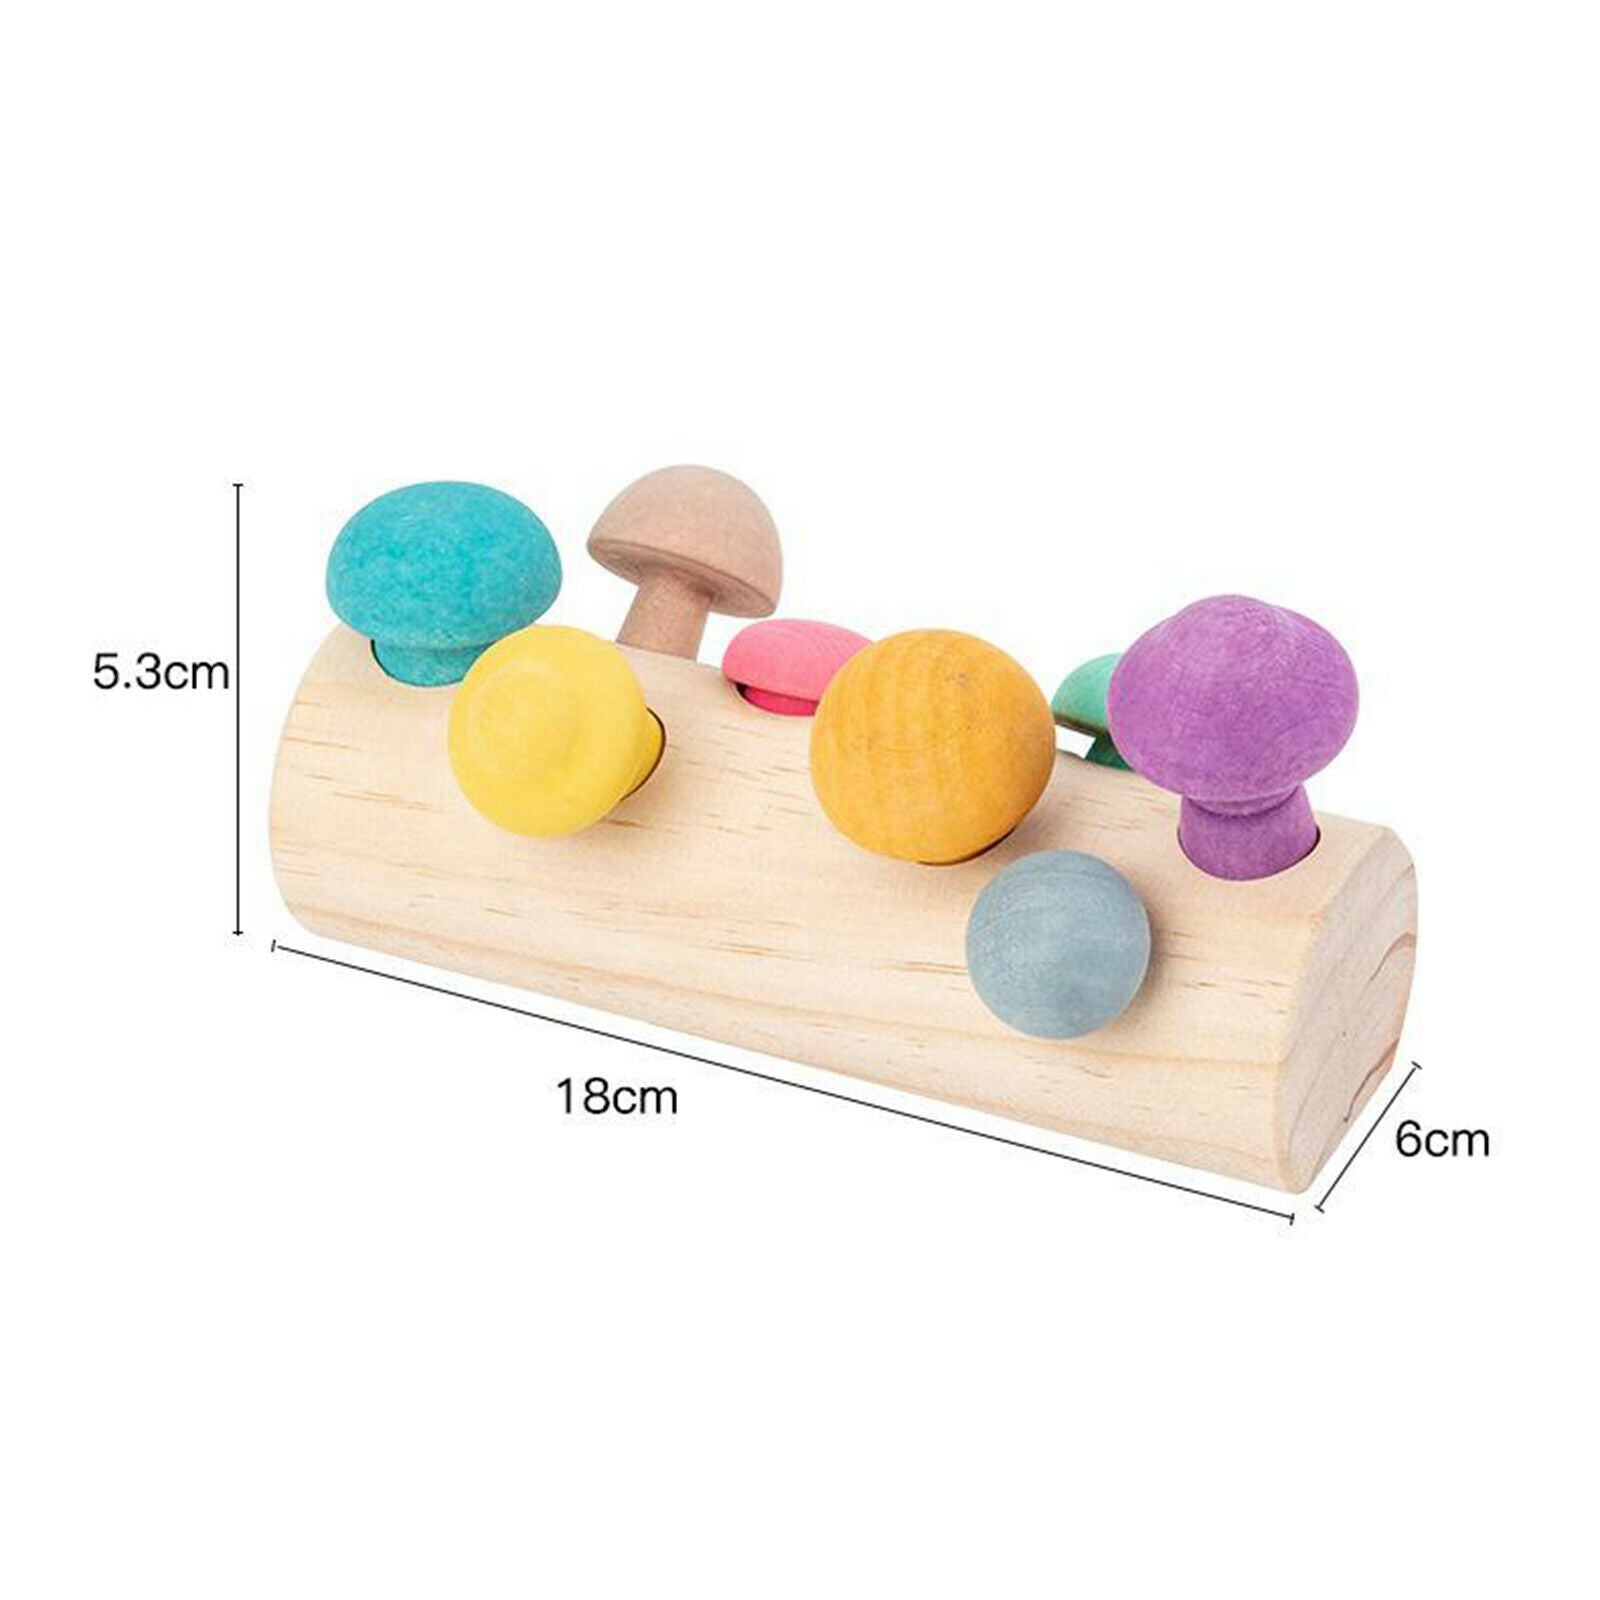 Wooden Mushroom Harvesting Catching   Educational Game for Toddler Toys